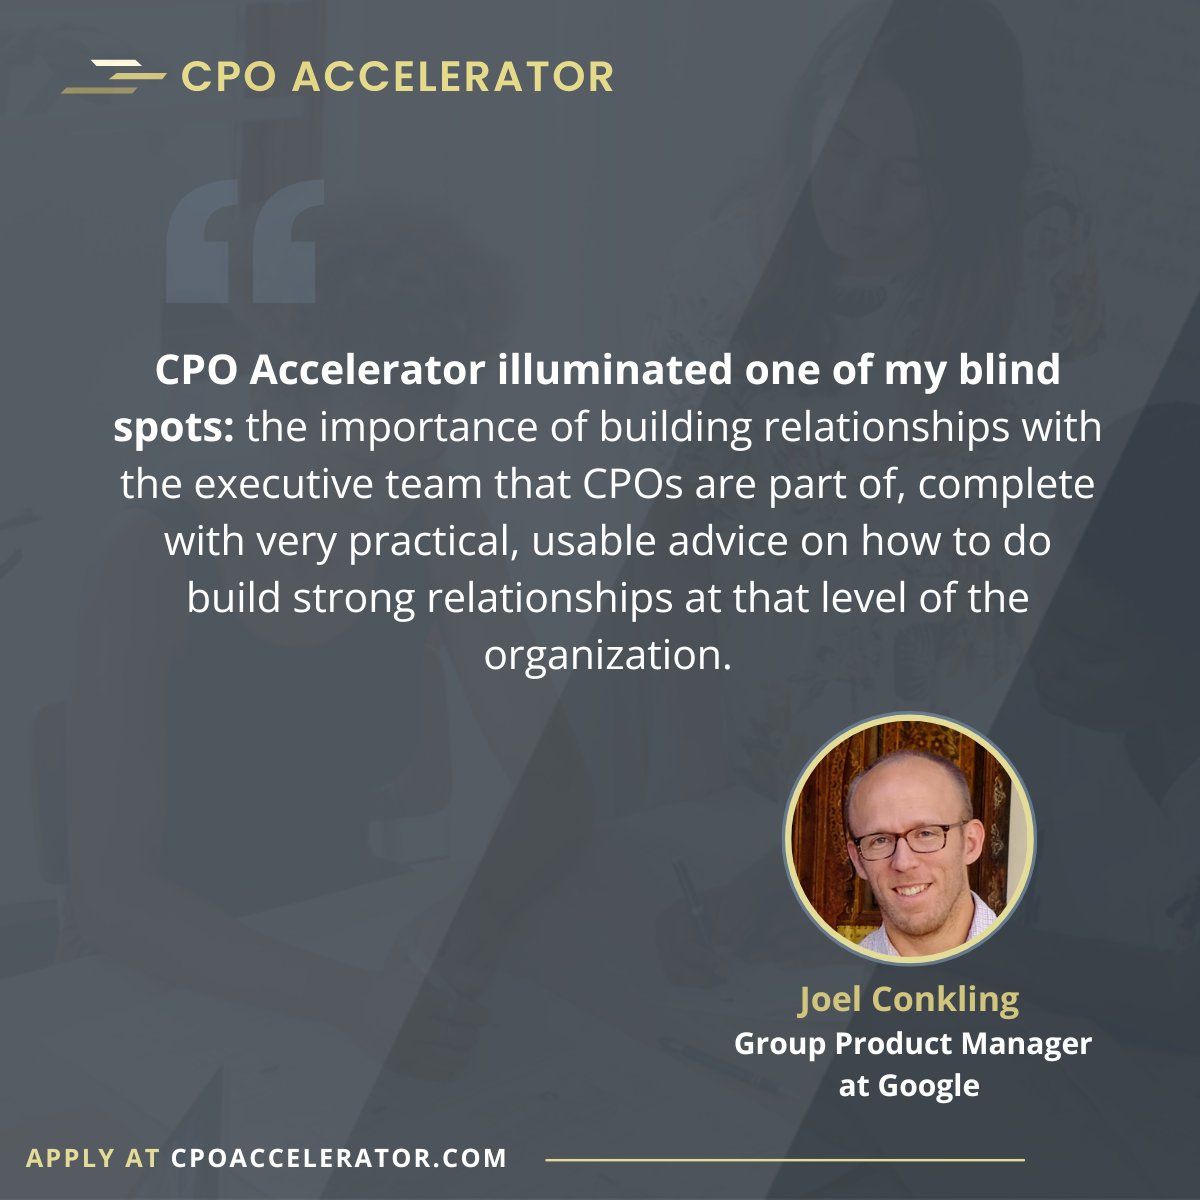 Stepping into exec roles as a product leader brings unique challenges. Our CPO Accelerator empowers your journey. Hear from grad Joel Conkling on how it equipped him for executive leadership. Apply now for Sept 2024 Cohort! cpoaccelerator.com #CPOAccelerator